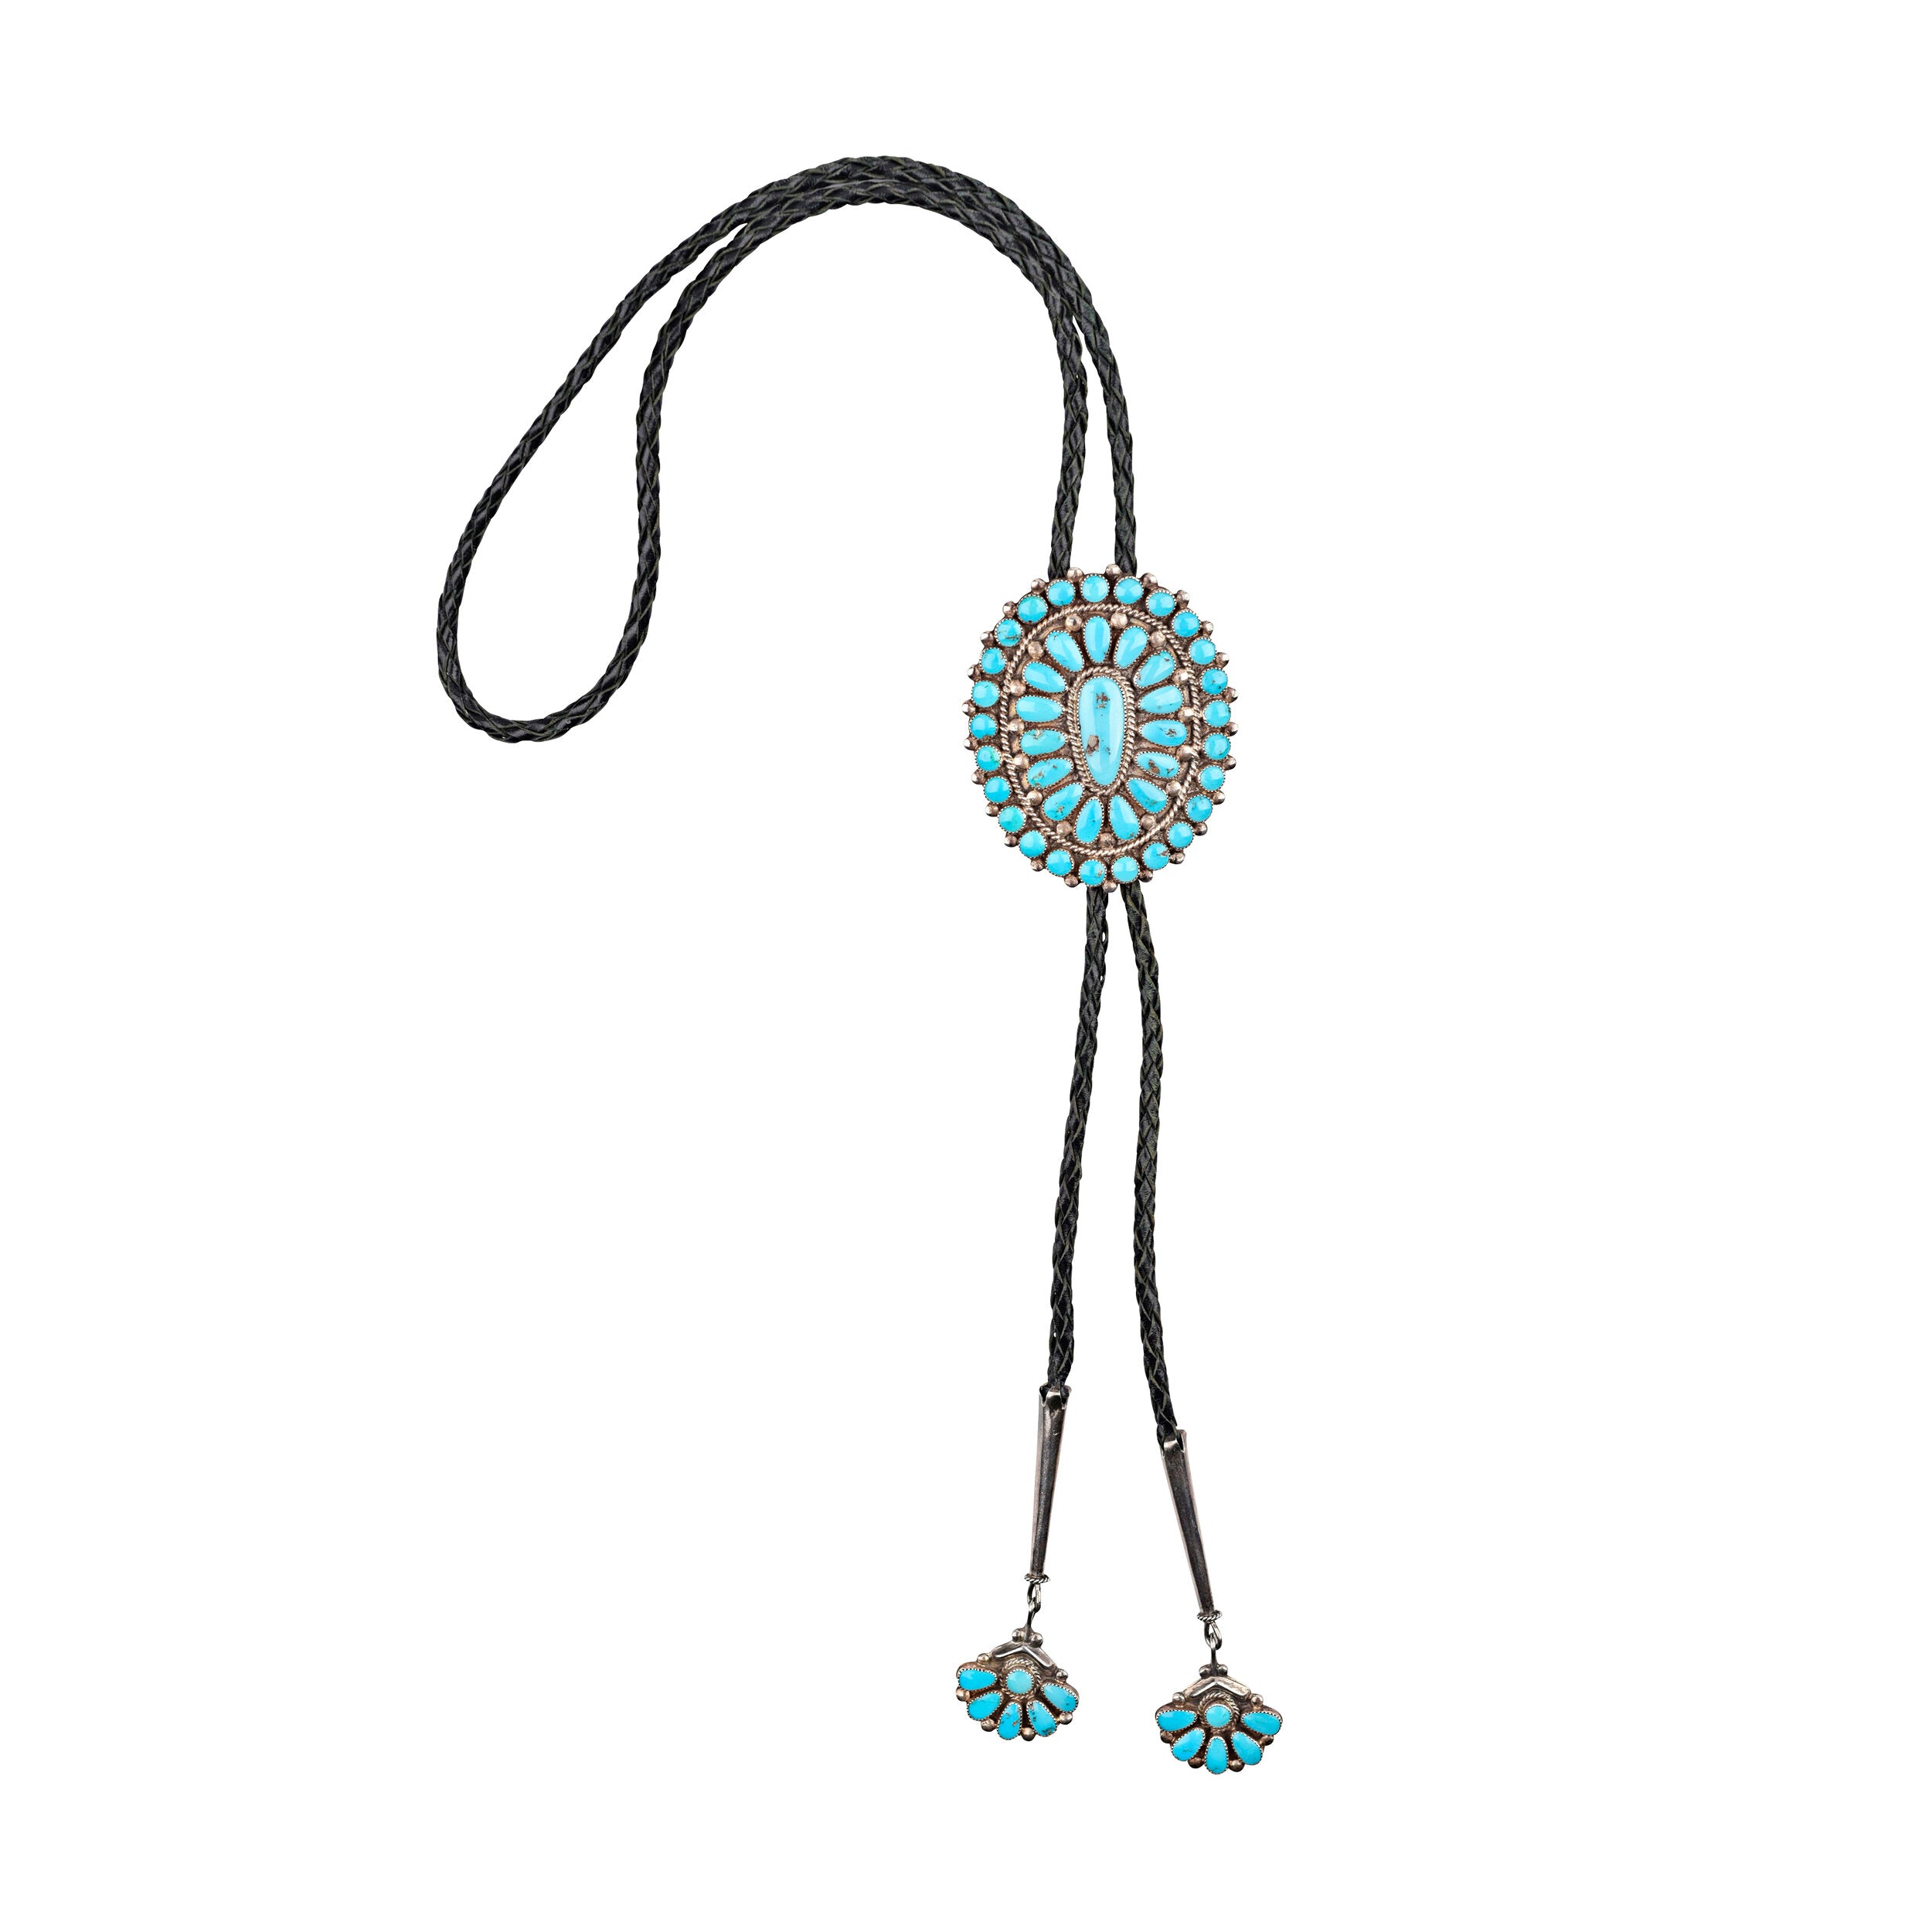 The In Bloom Petit Point Bolo Tie, c. 1960's